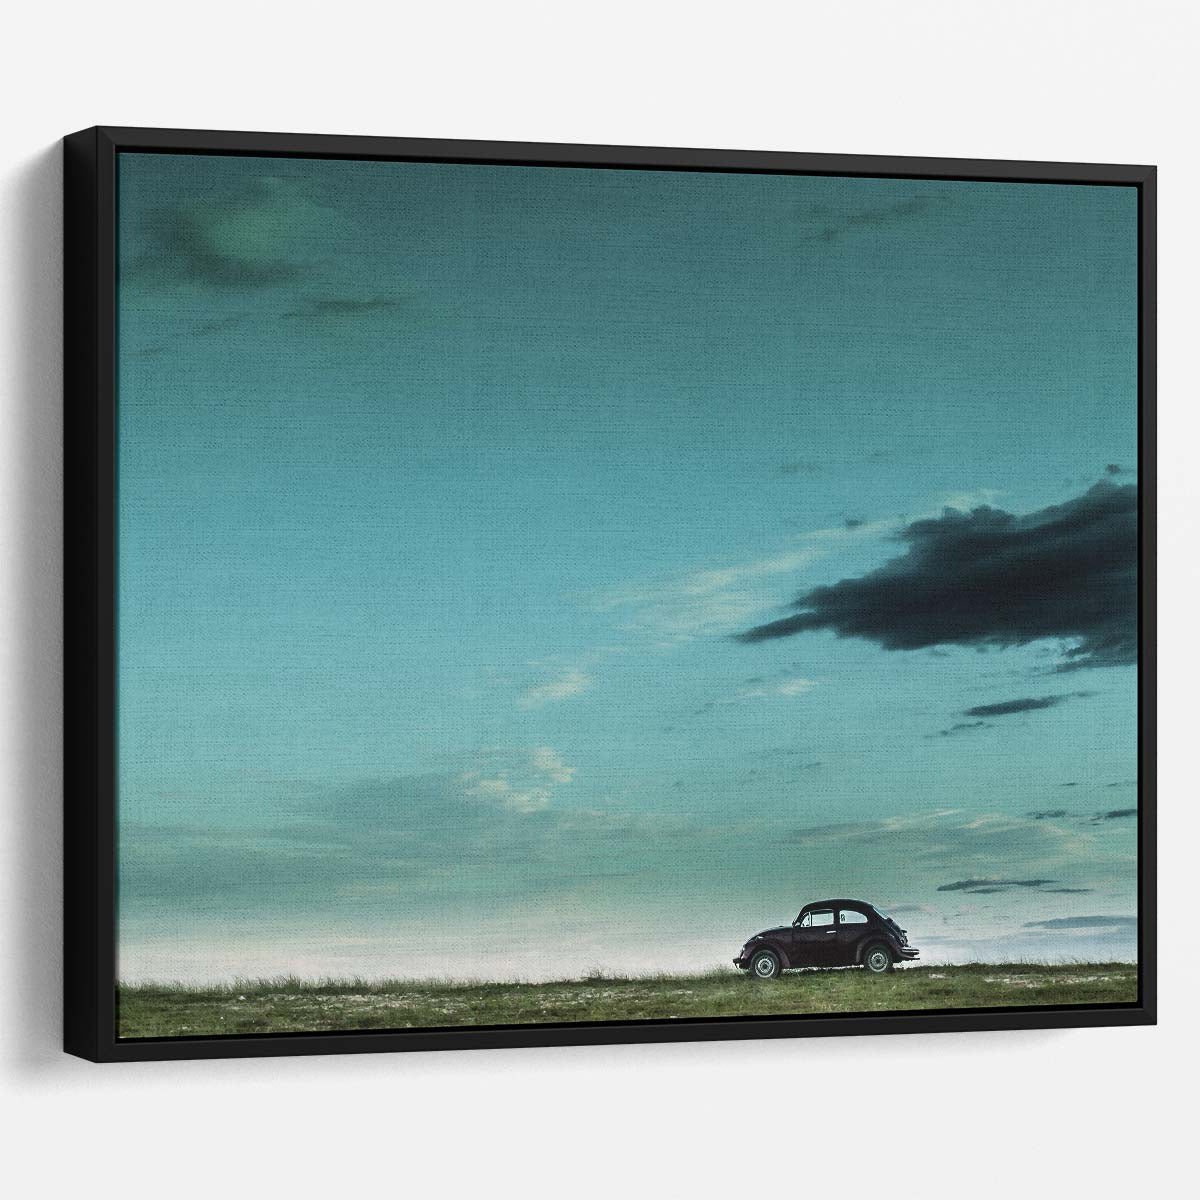 Vintage VW Beetle in Desolate Landscape Wall Art by Luxuriance Designs. Made in USA.